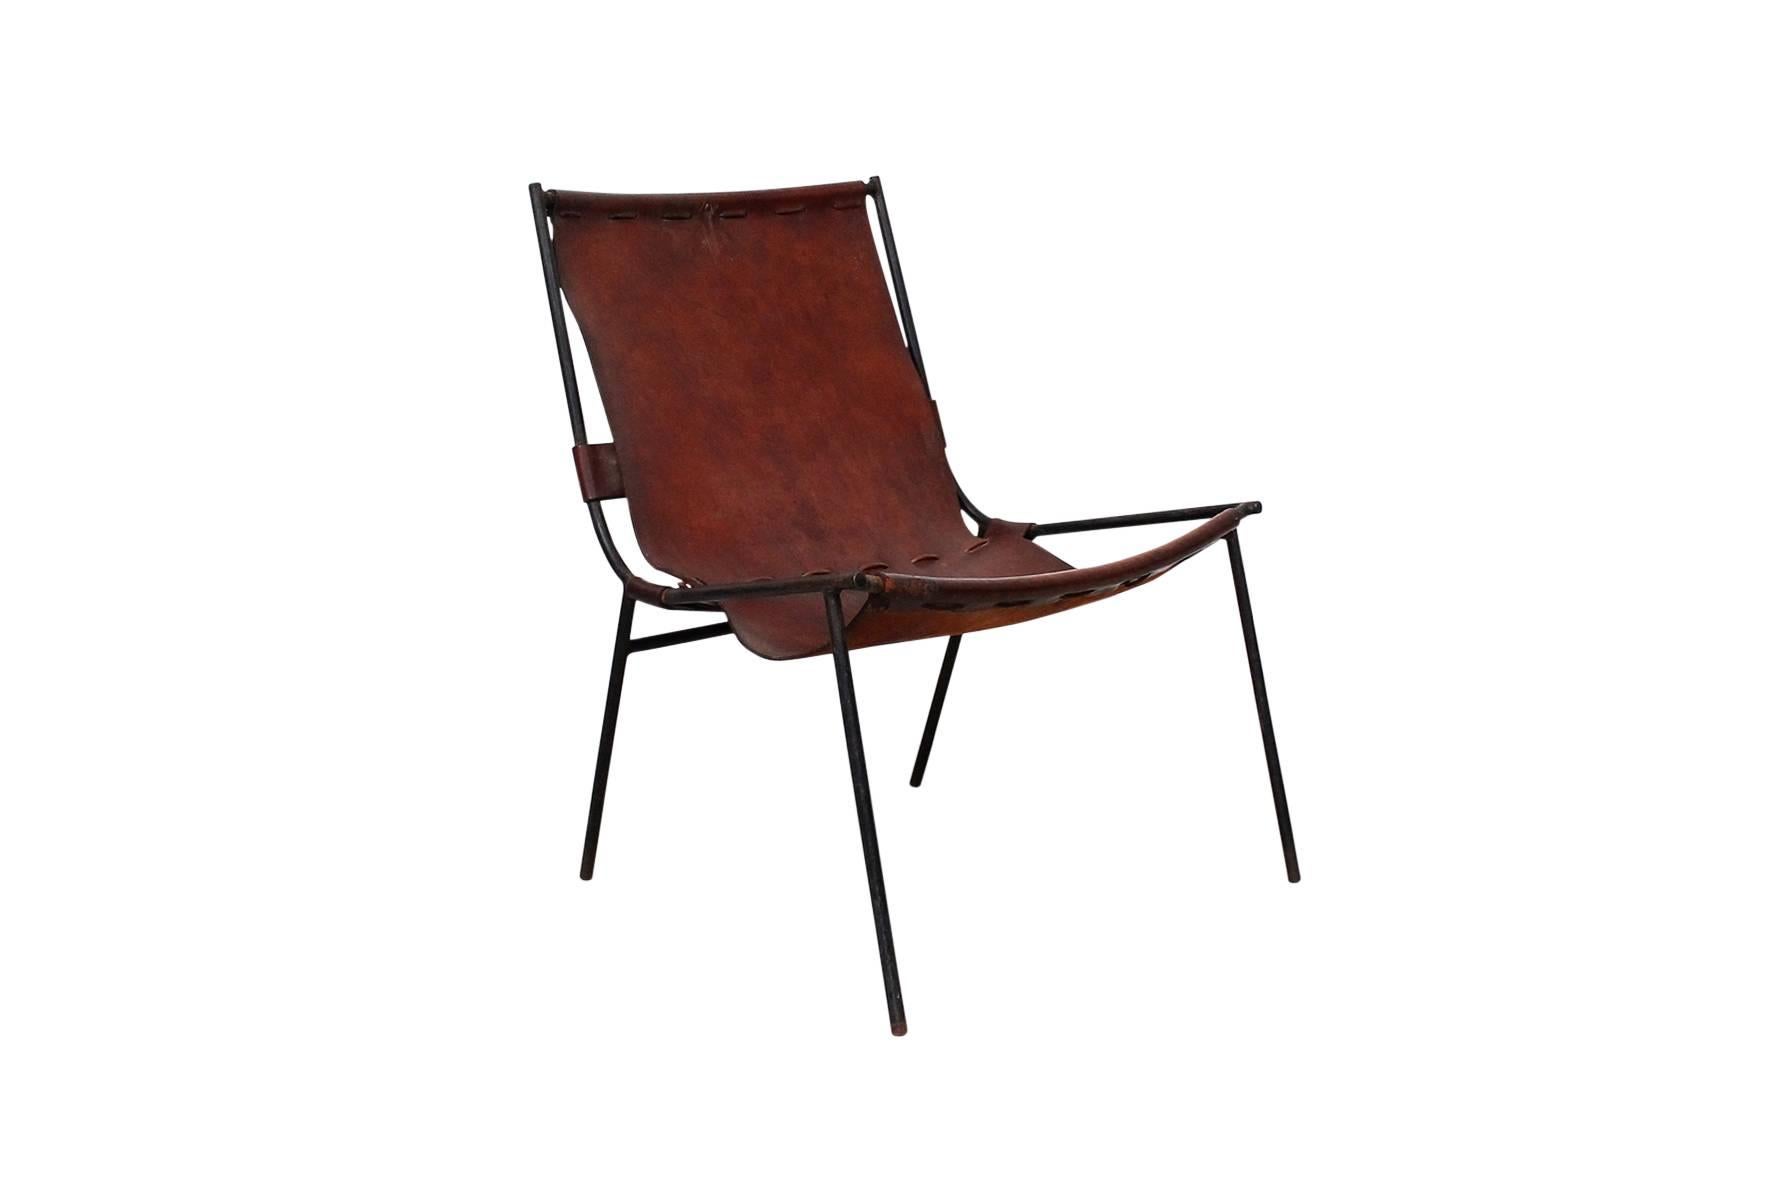 Rare iron and leather sling chair by noted New Hampshire craftsman Gordon Keeler. Keeler widely exhibited his turned wood bowls in New England for many decades. This chair is an early experiment in leather work. Leather sling branded with the Keeler